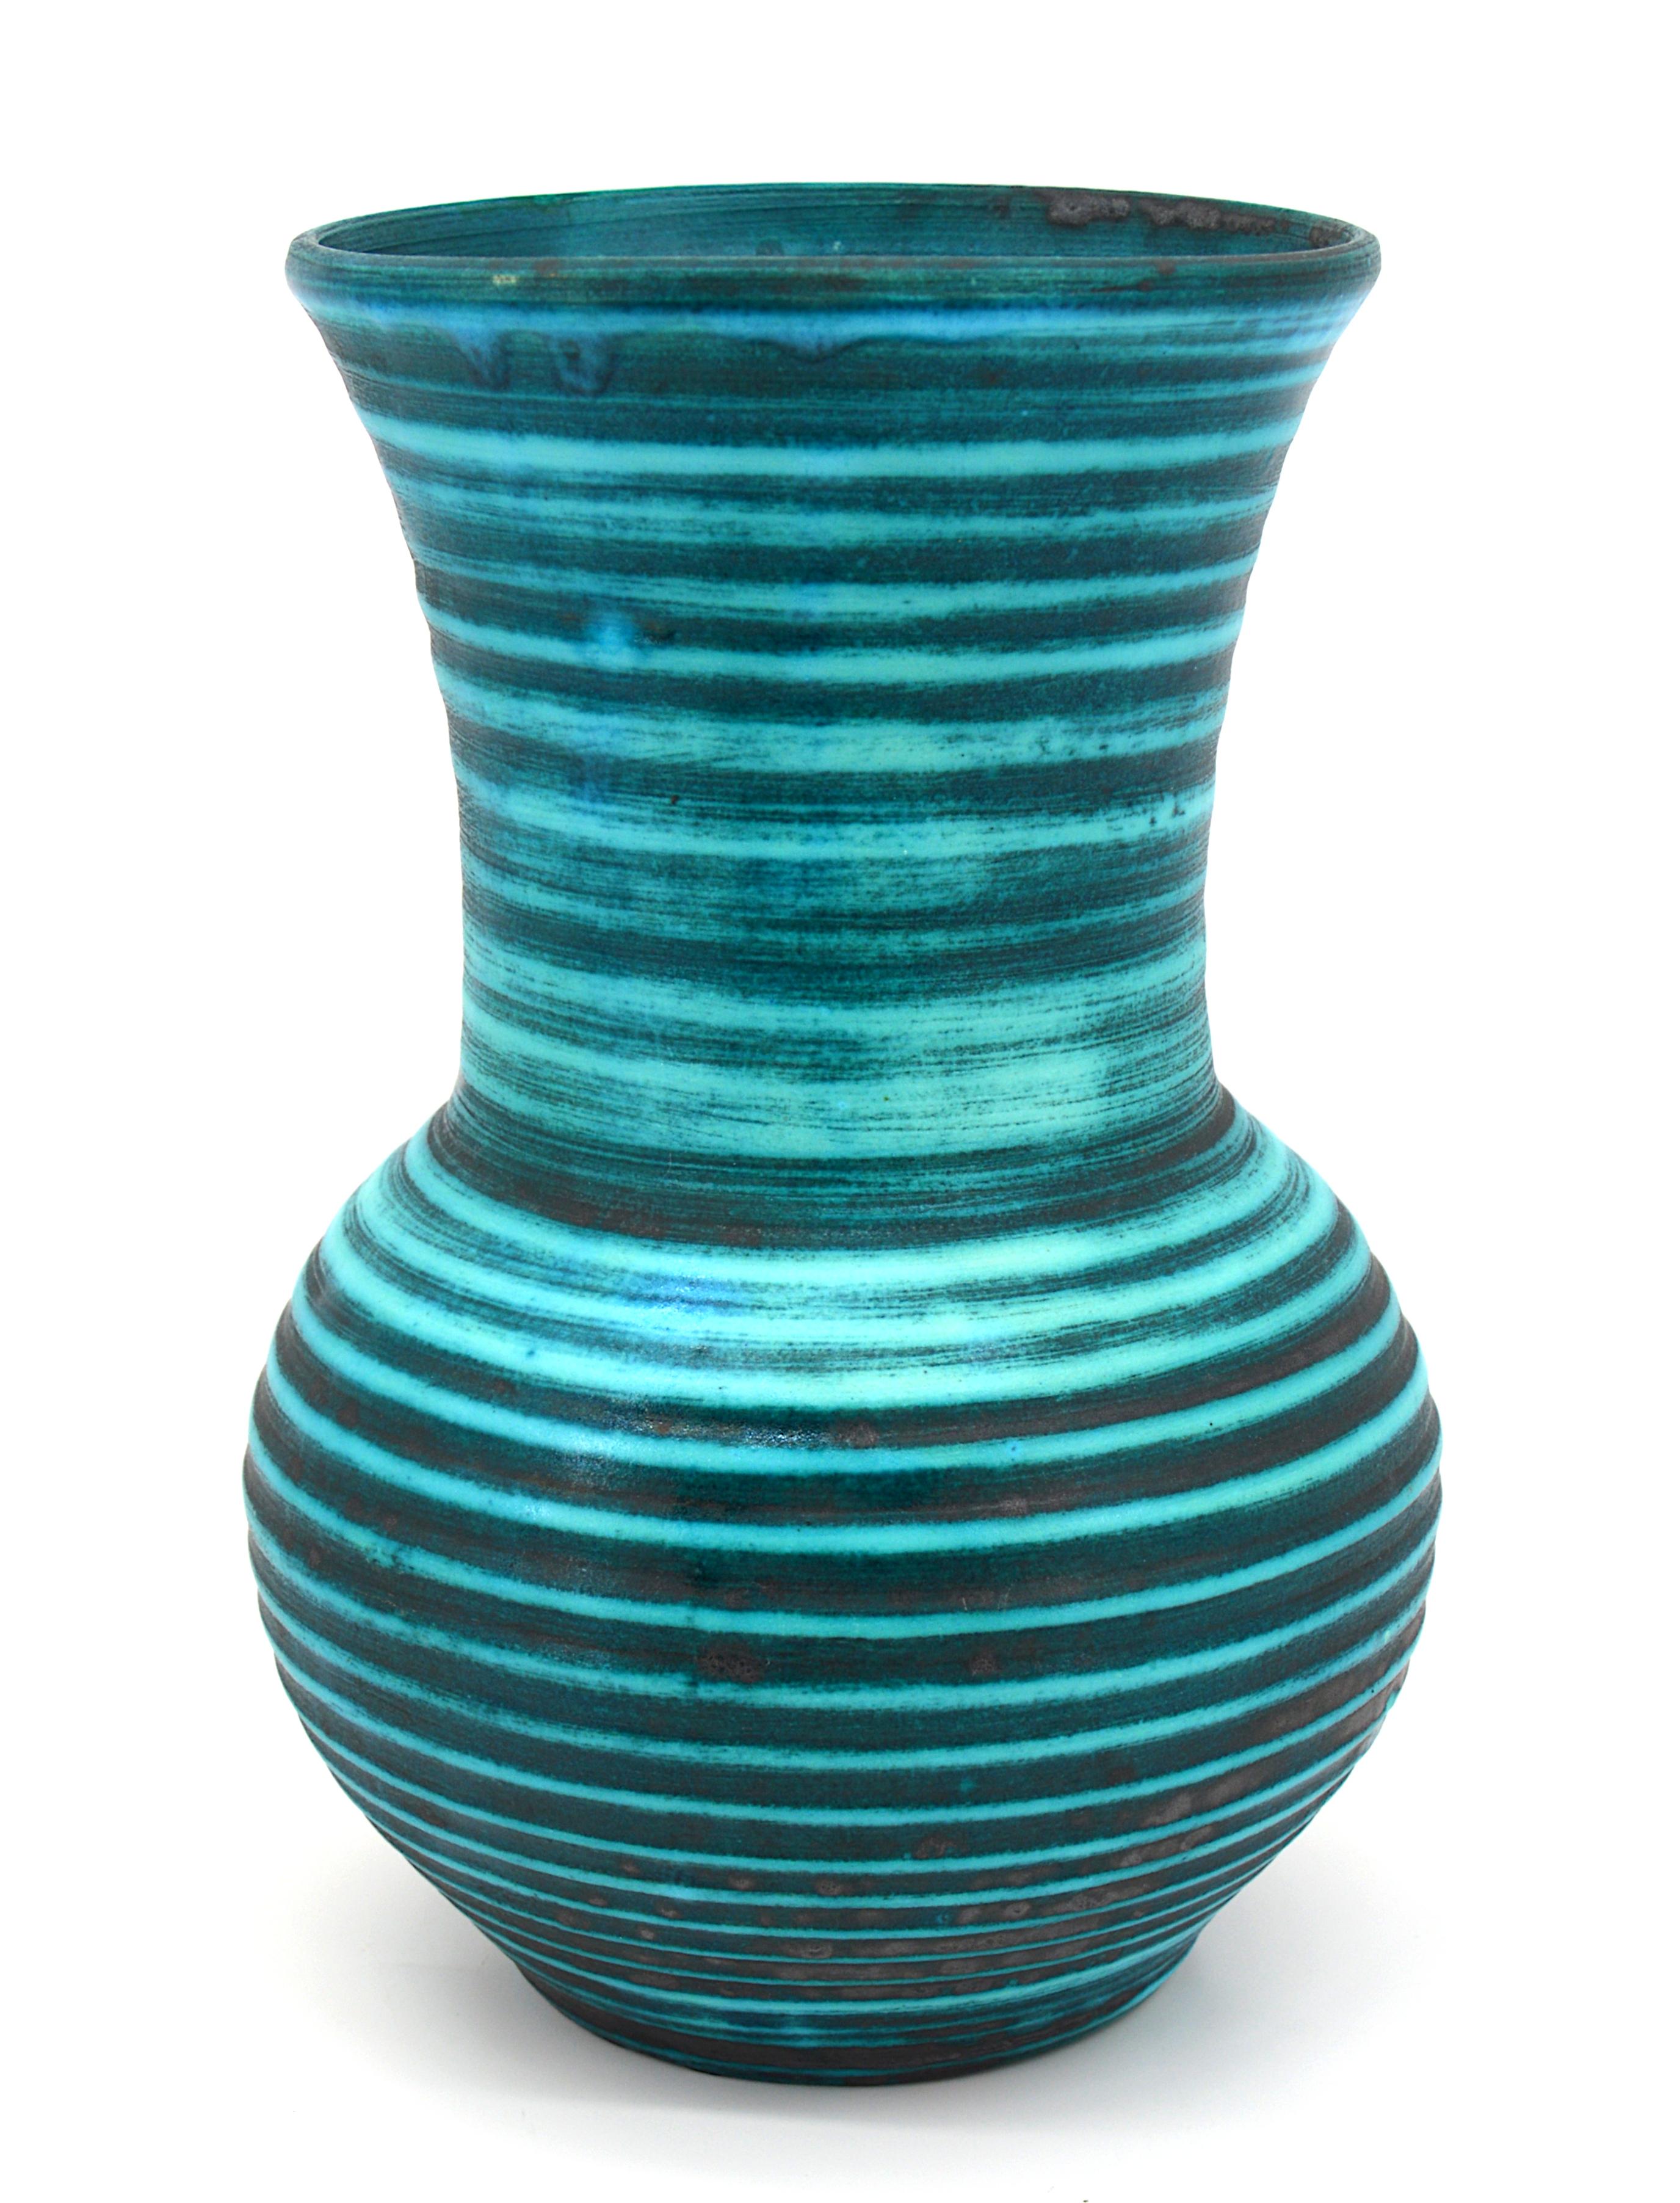 French midcentury vase by Accolay, France, 1950s. Turquoise blue and anthracite gray concentric circle vase. Measures: Height 25cm (9.8